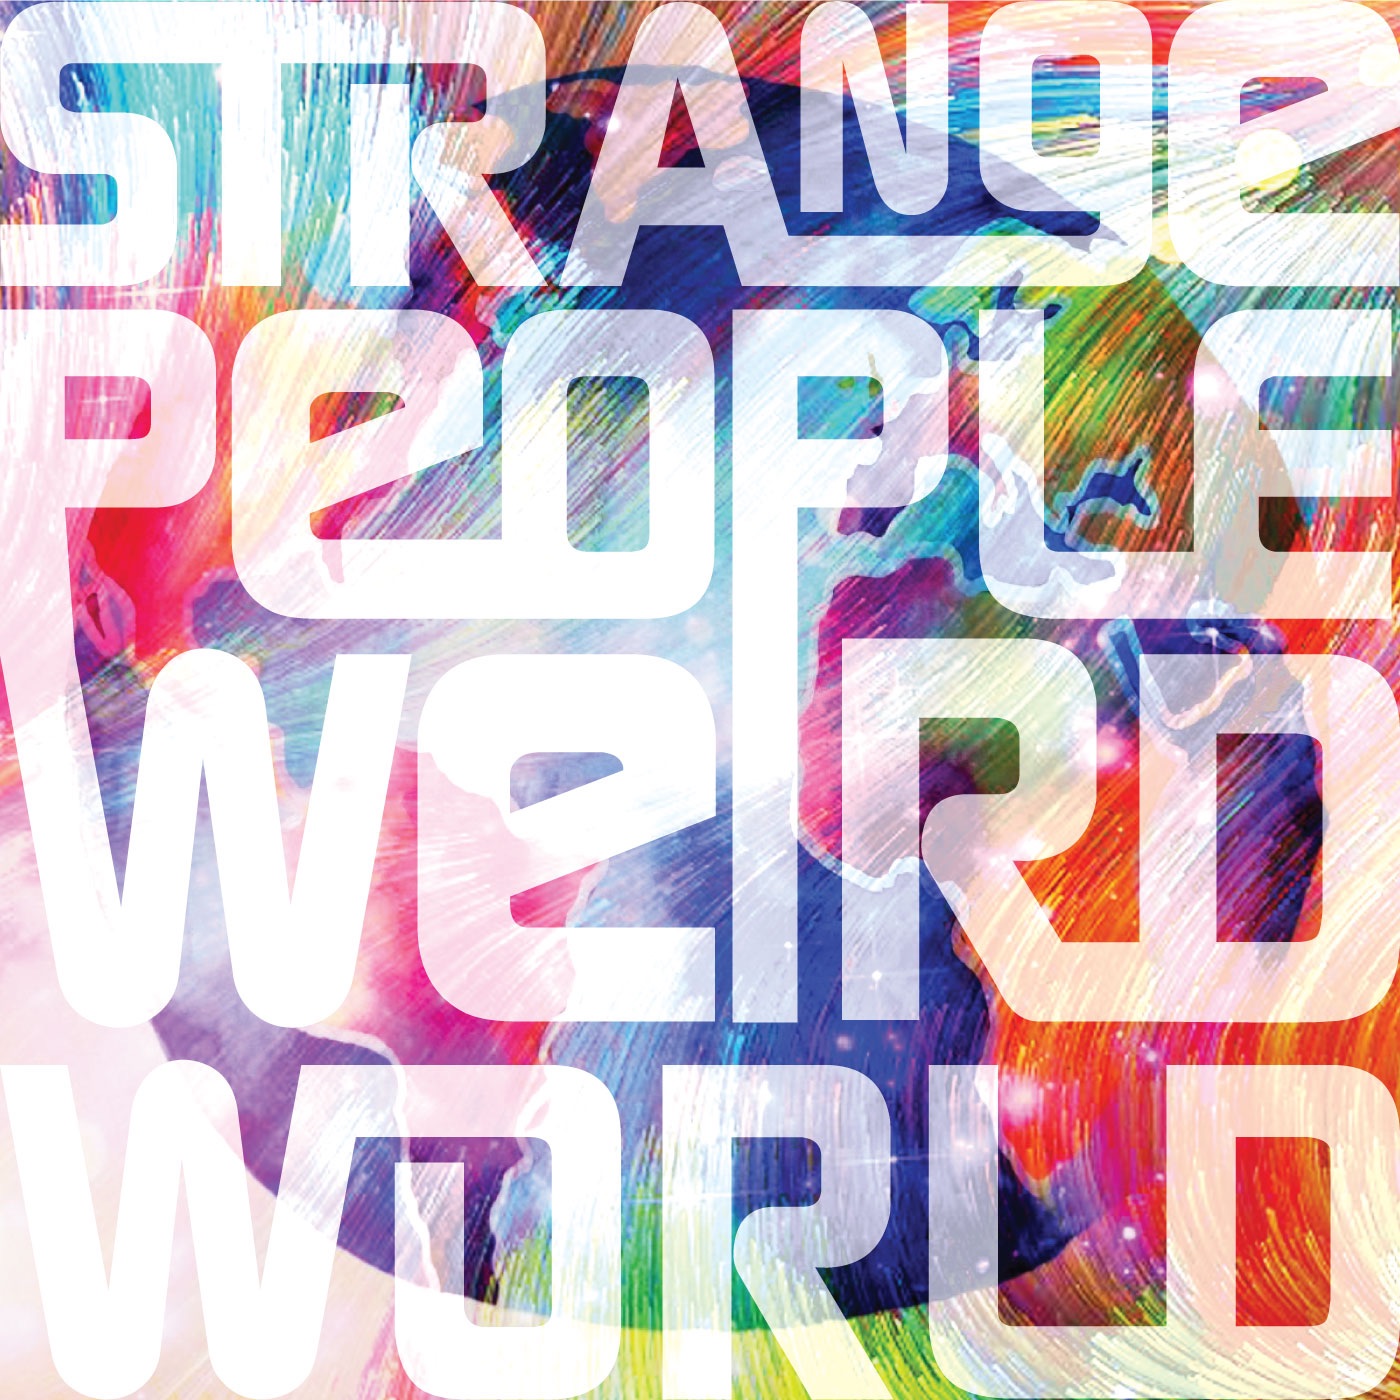 strange peoples in the world